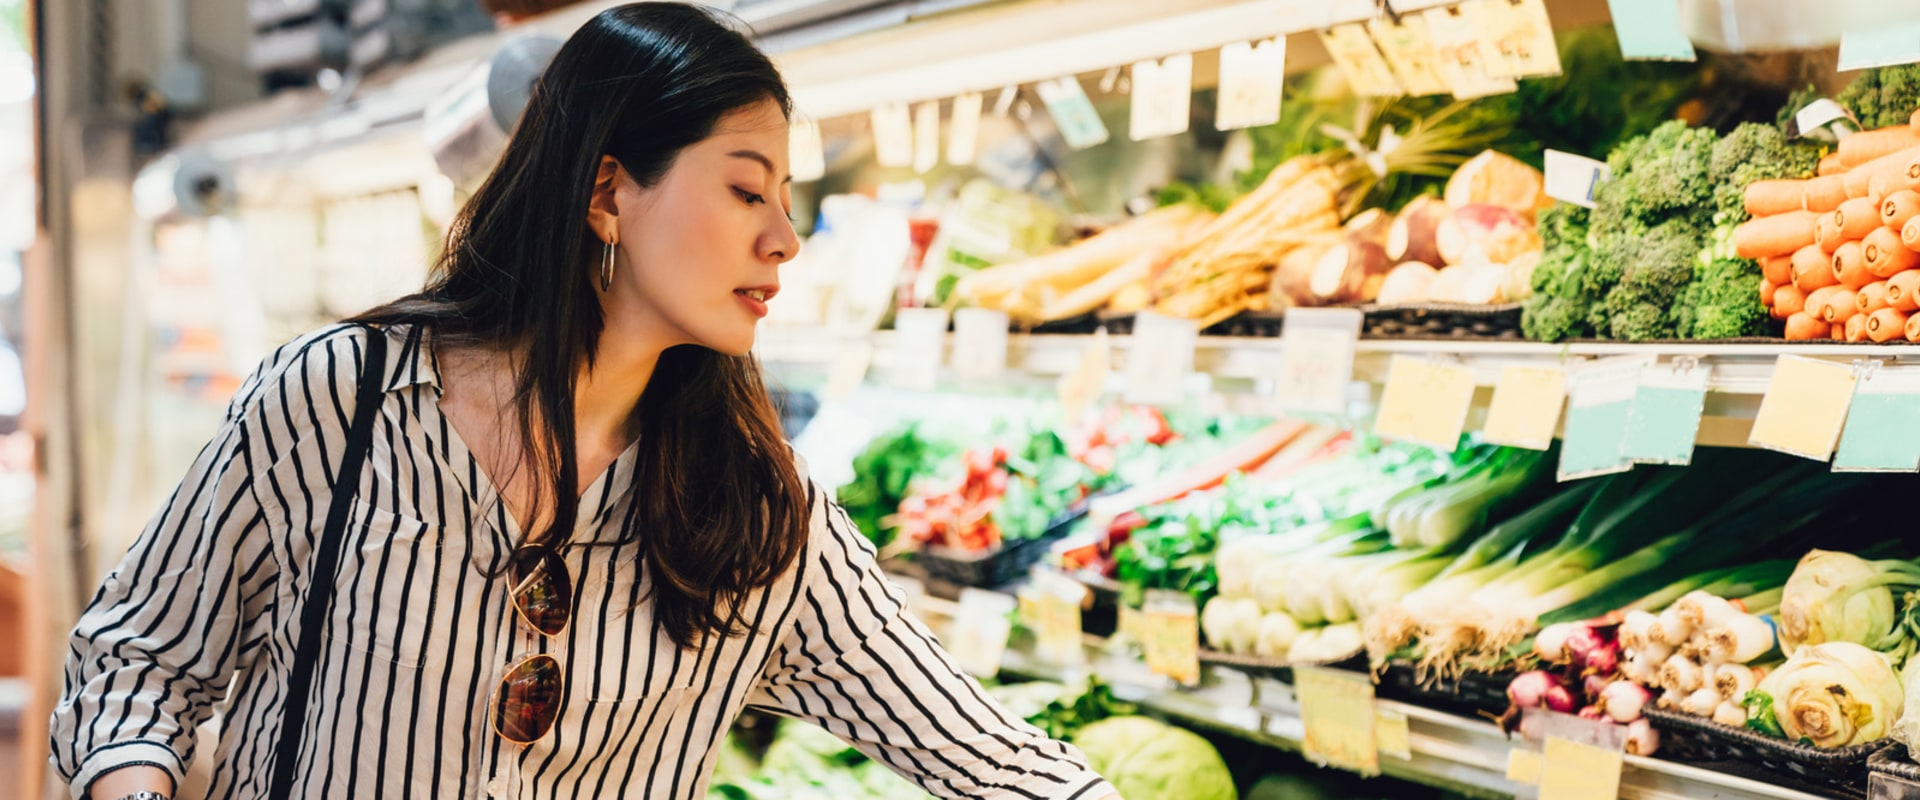 Grocery Shopping: How to Make it Stress-Free